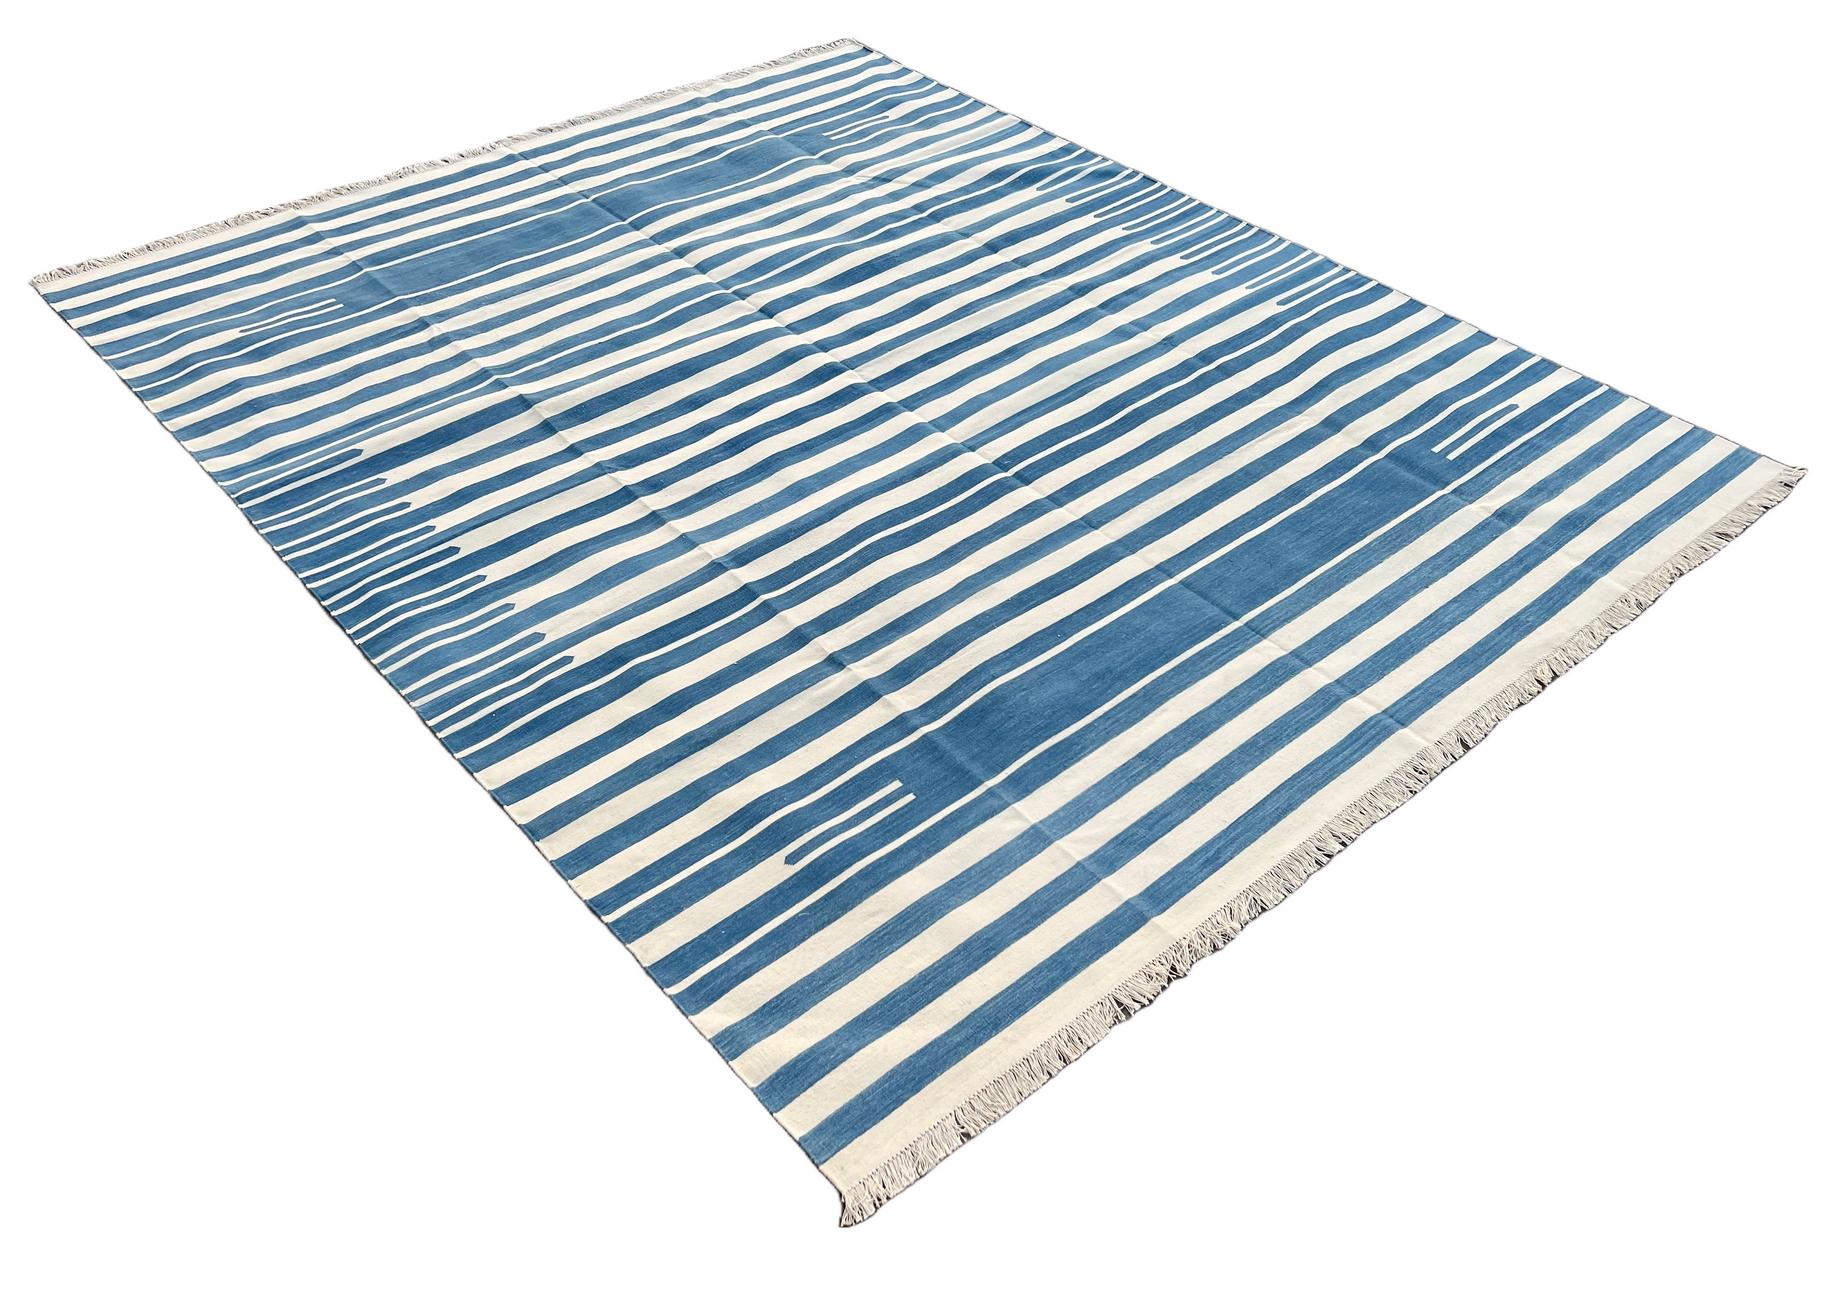 Cotton Natural Vegetable Dyed, Sky Blue And White Striped Indian Rug - 8'x10'
These special flat-weave dhurries are hand-woven with 15 ply 100% cotton yarn. Due to the special manufacturing techniques used to create our rugs, the size and color of